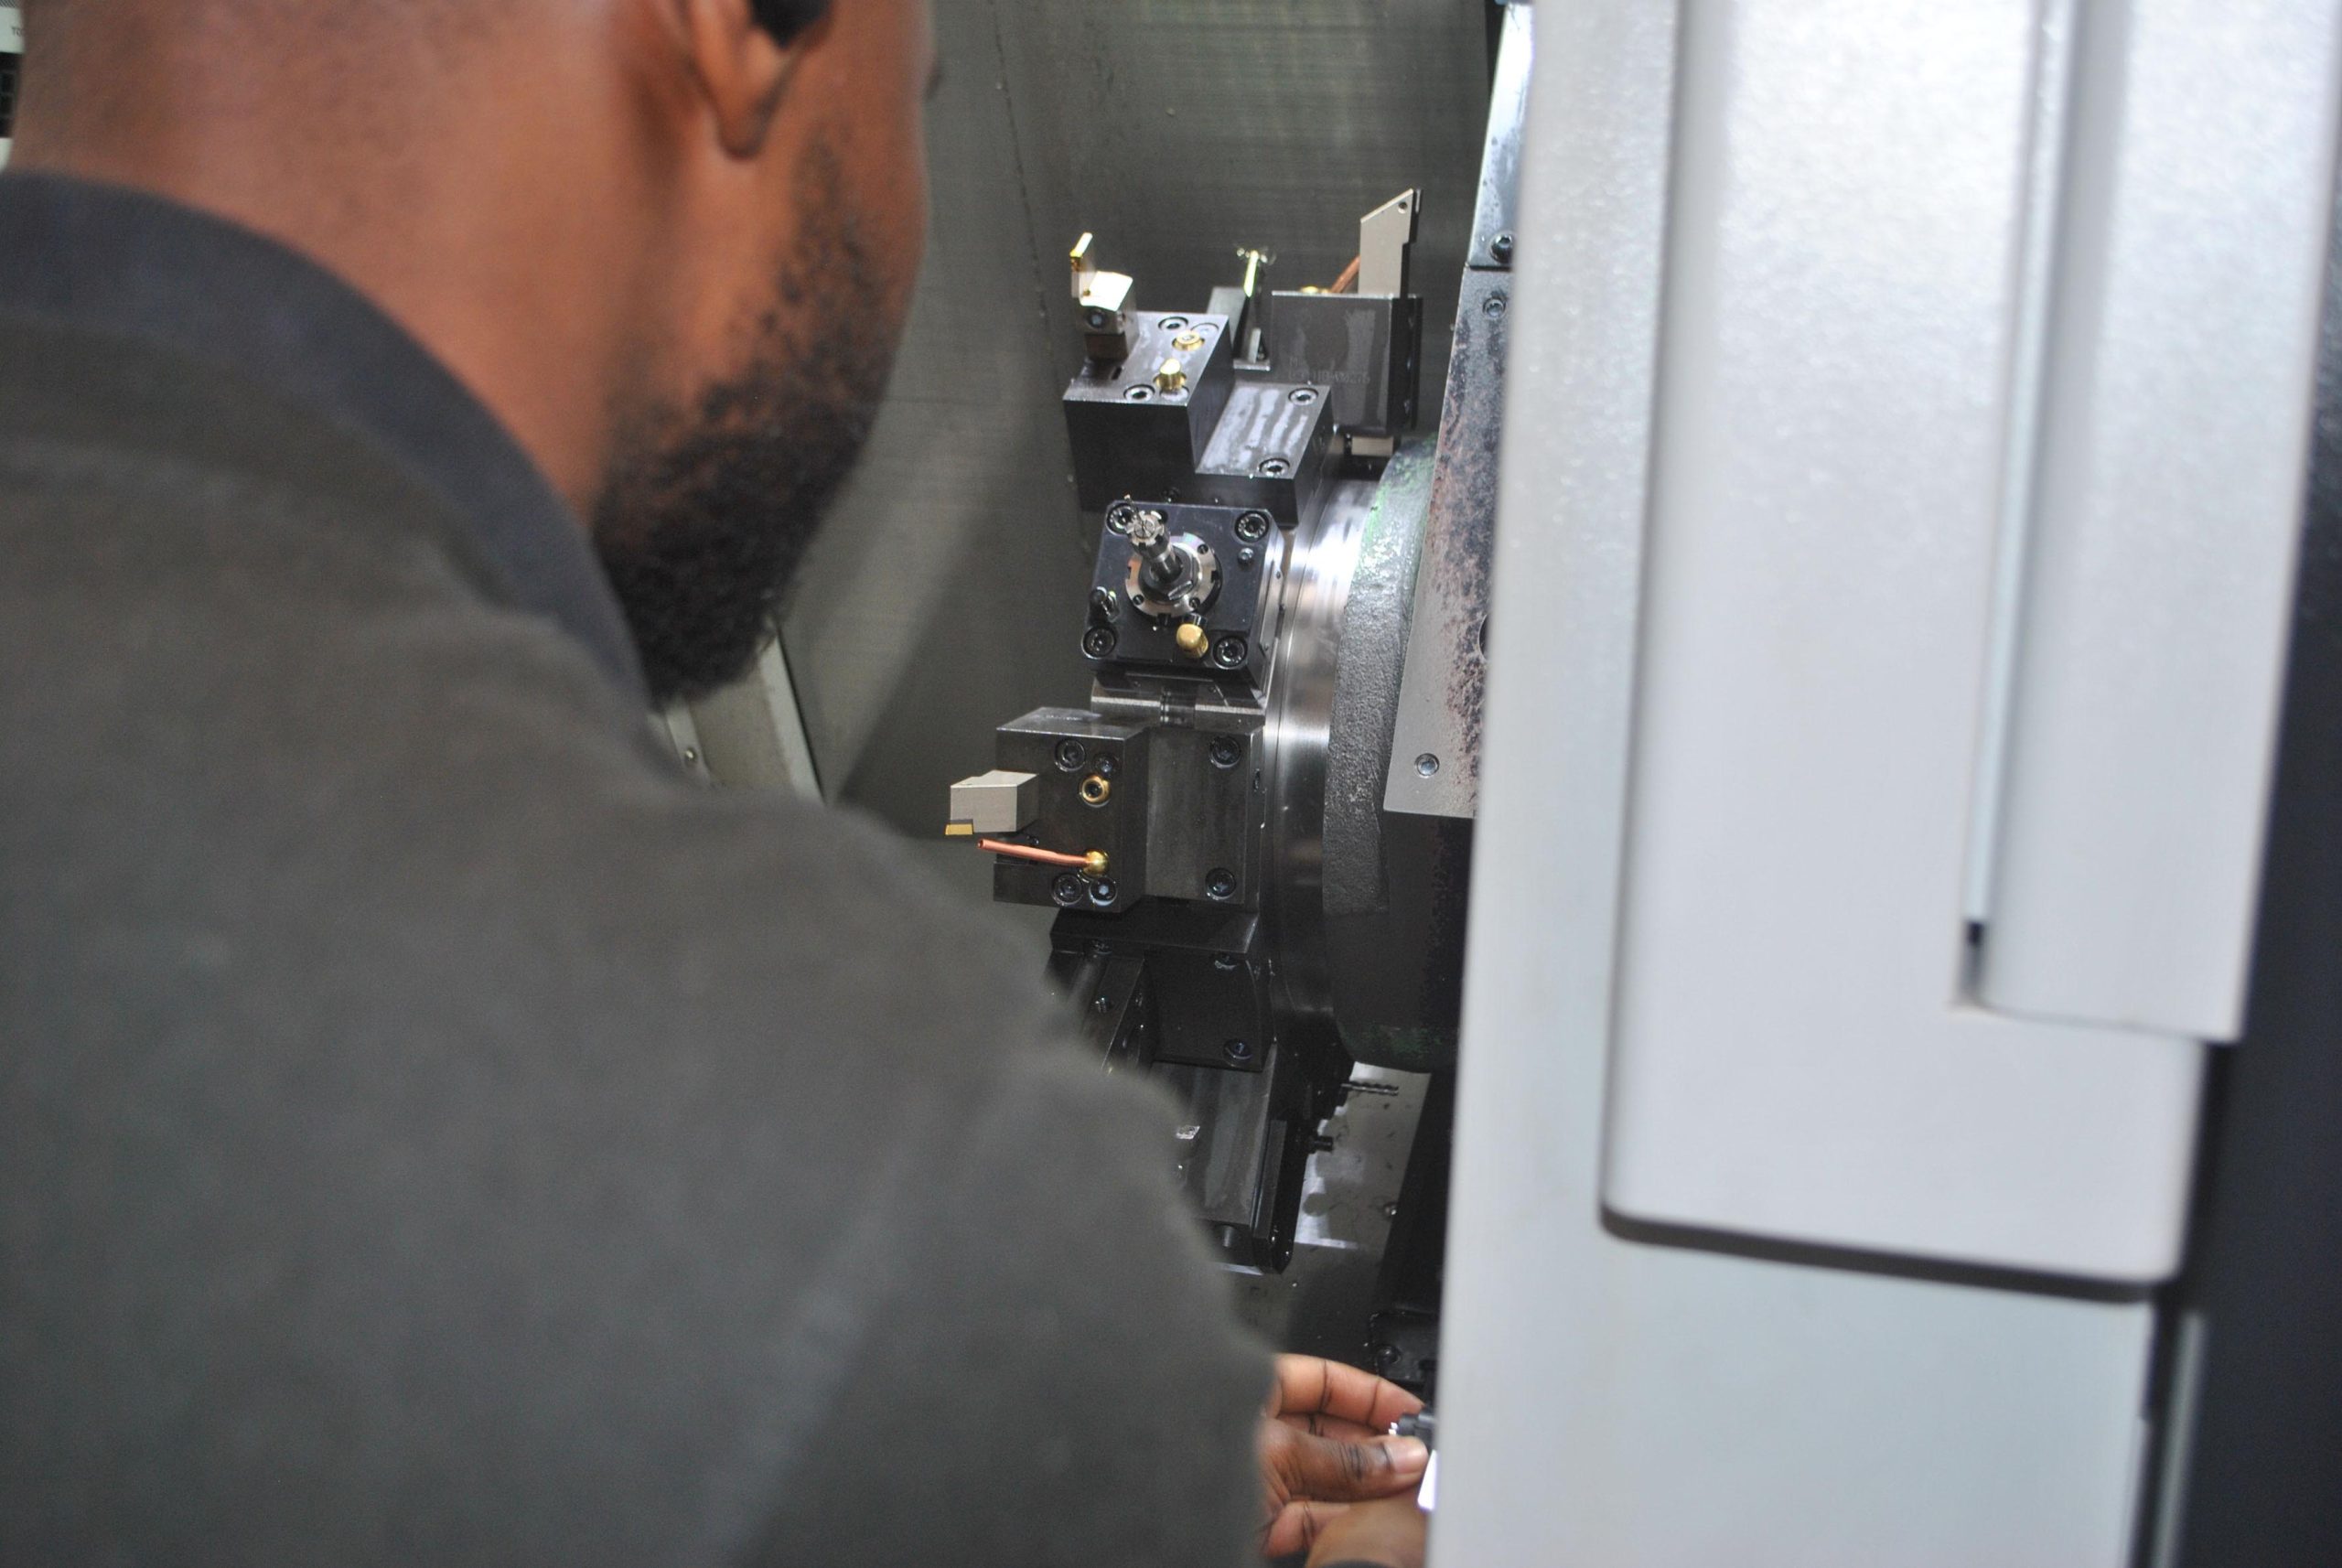 Looking over the shoulder of an Operator into the interior of a Doosan Lynx 2100LSYA Horizontal Single Turret Lathe